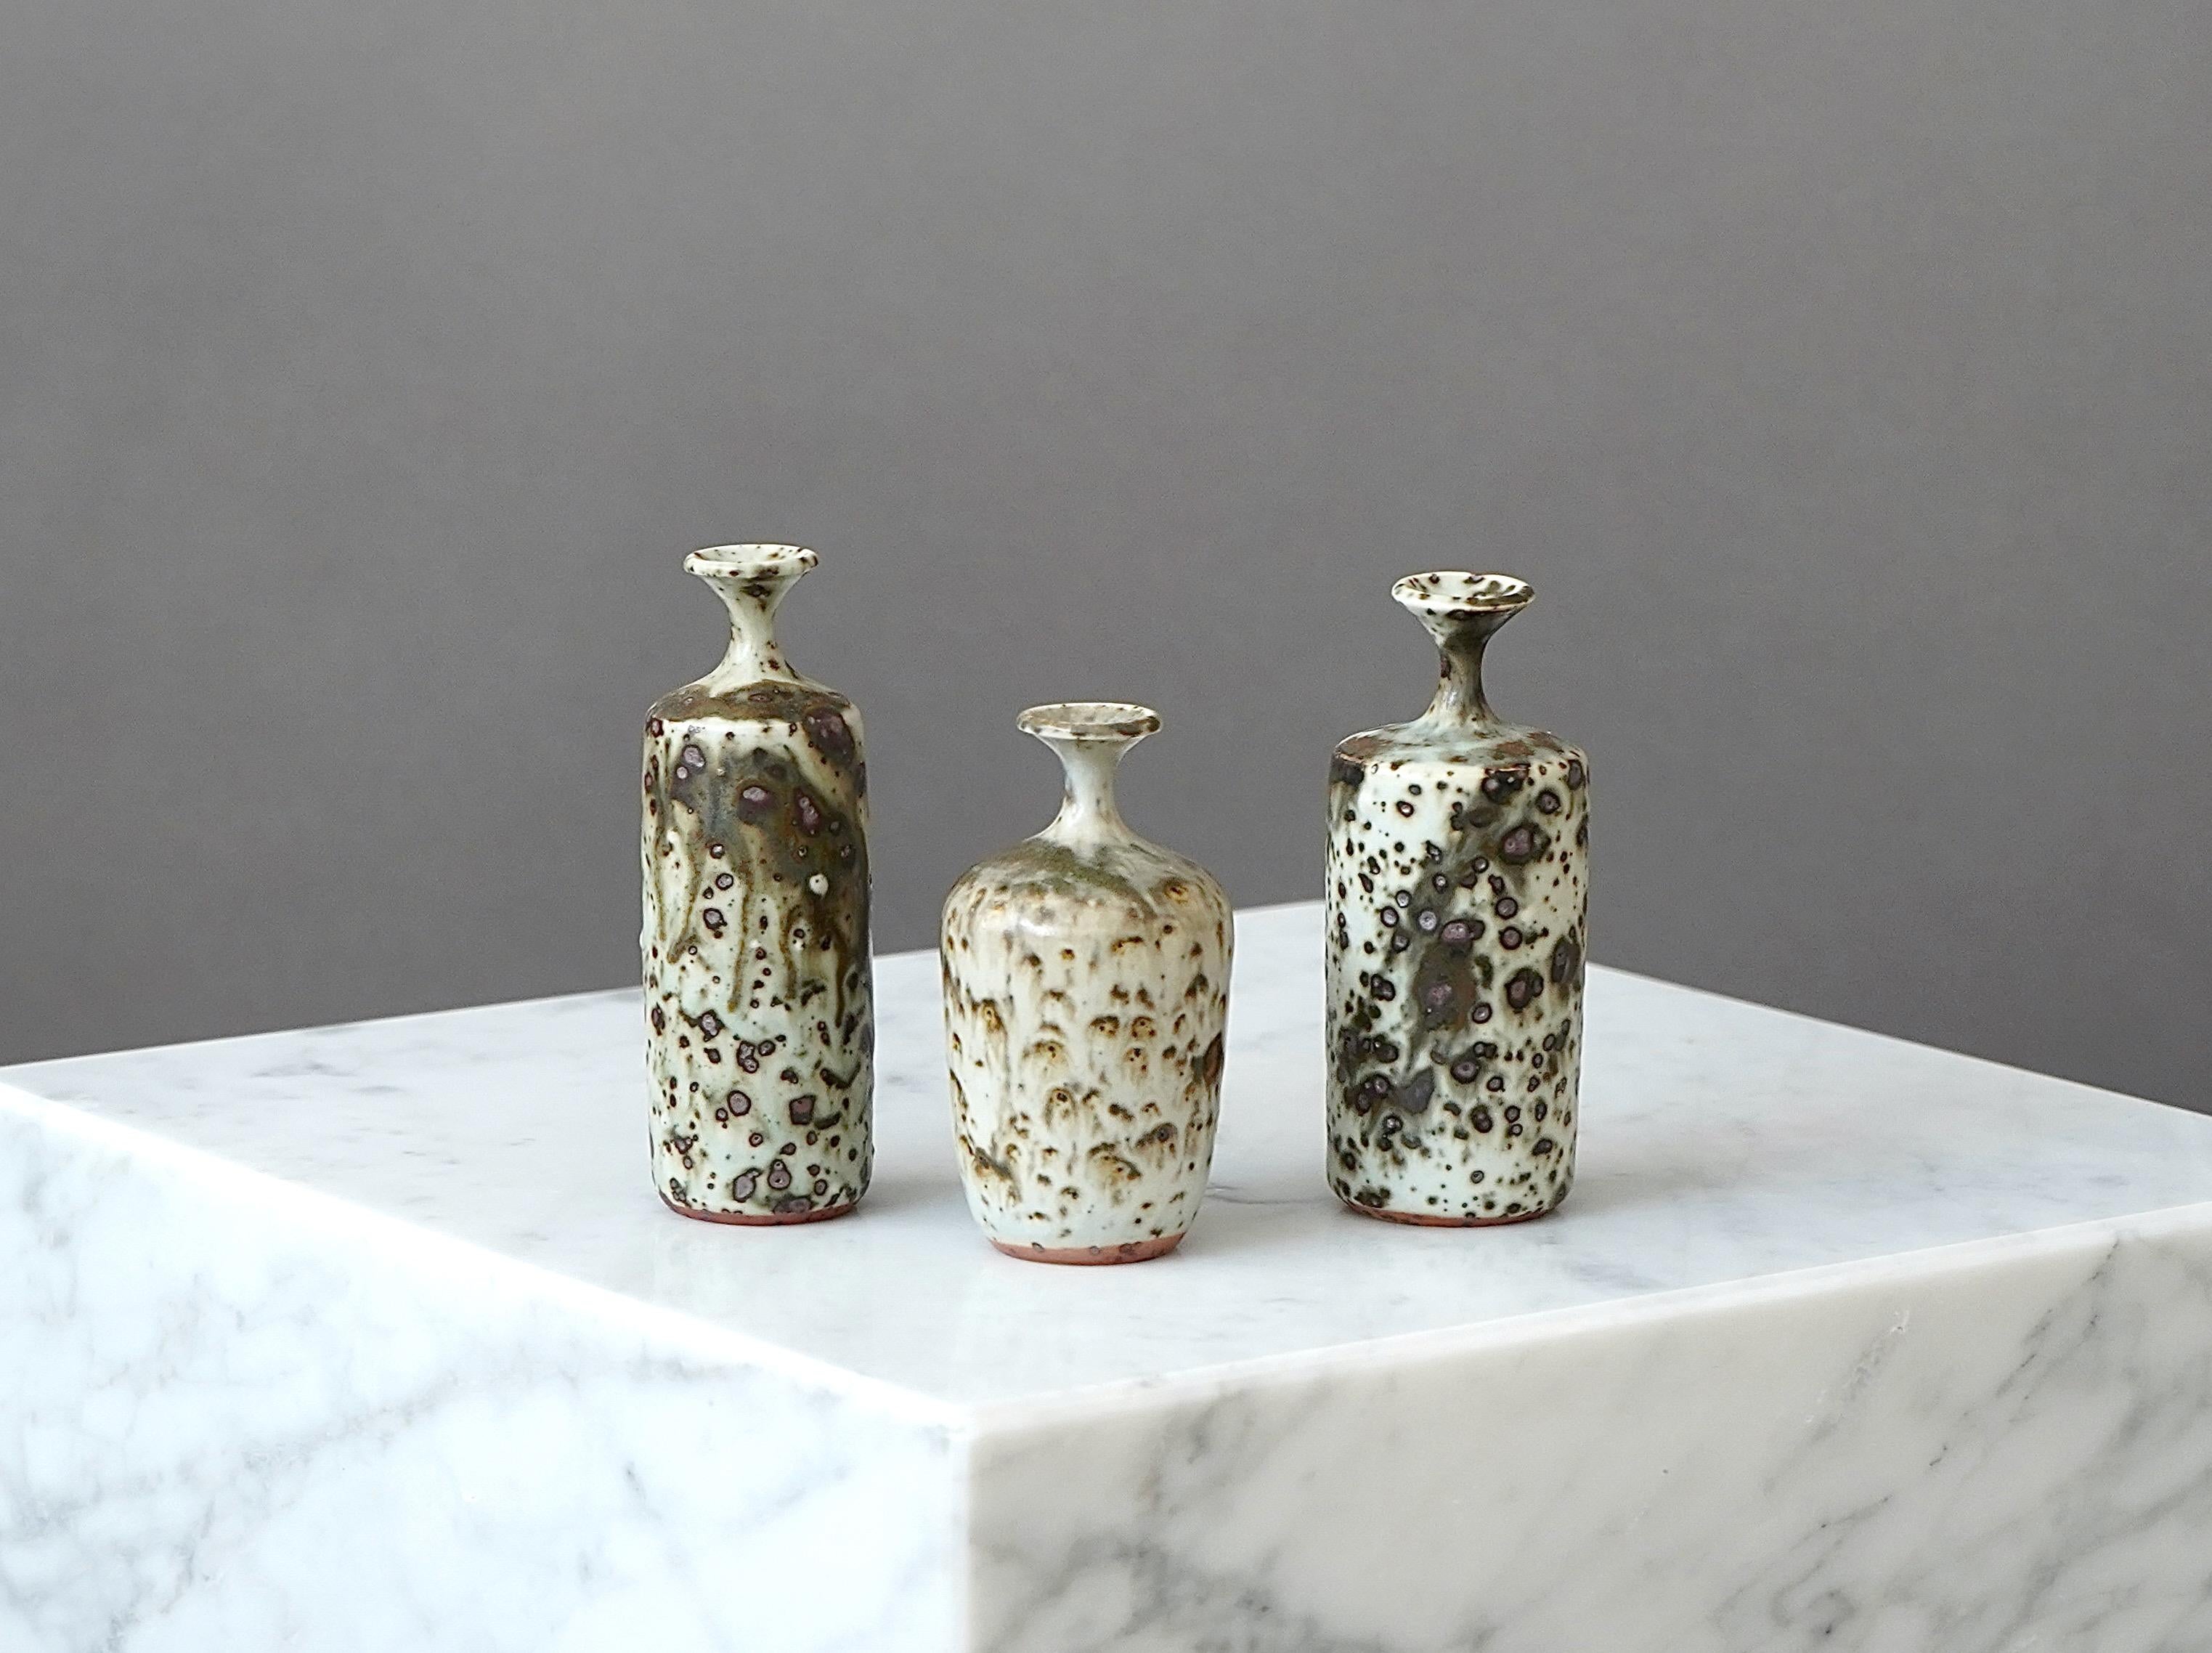 A set of beautiful stoneware vases with amazing glaze.
Made by Rolf Palm, in the artist's studio, Mölle, Sweden, 1973.

Excellent condition. Incised ’Palm / Mölle’ and ’G3' for 1973’.

Rolf Palm (1930–2018) was one of Sweden’s leading ceramic